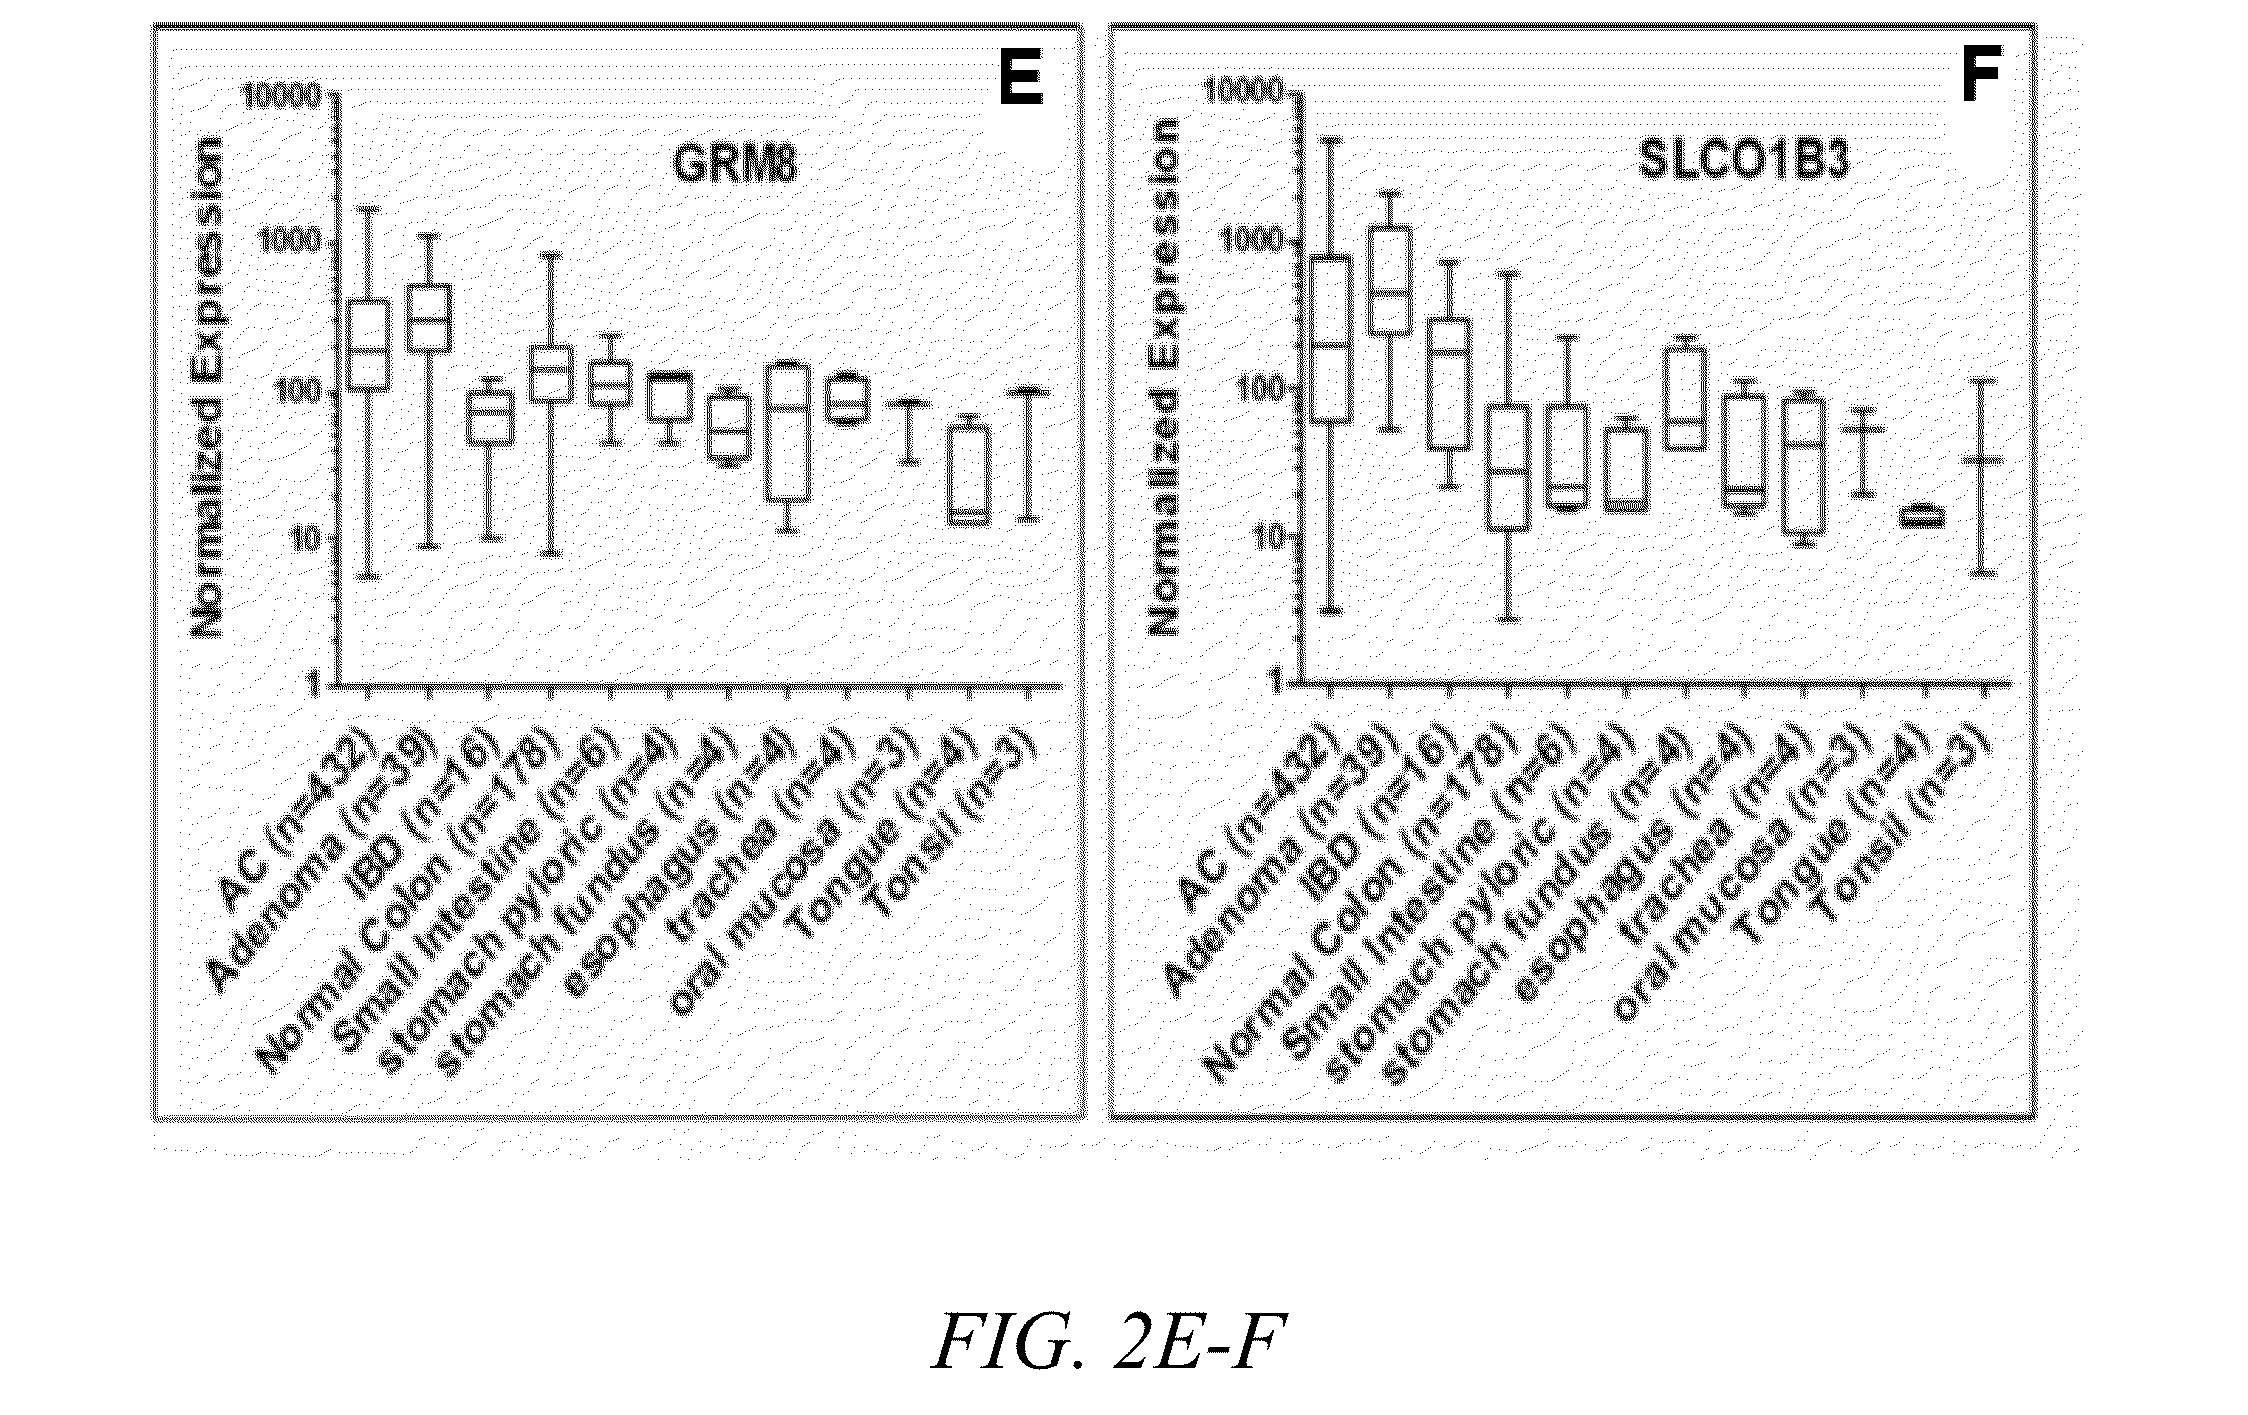 Method of screening for colon cancer using biomarkers